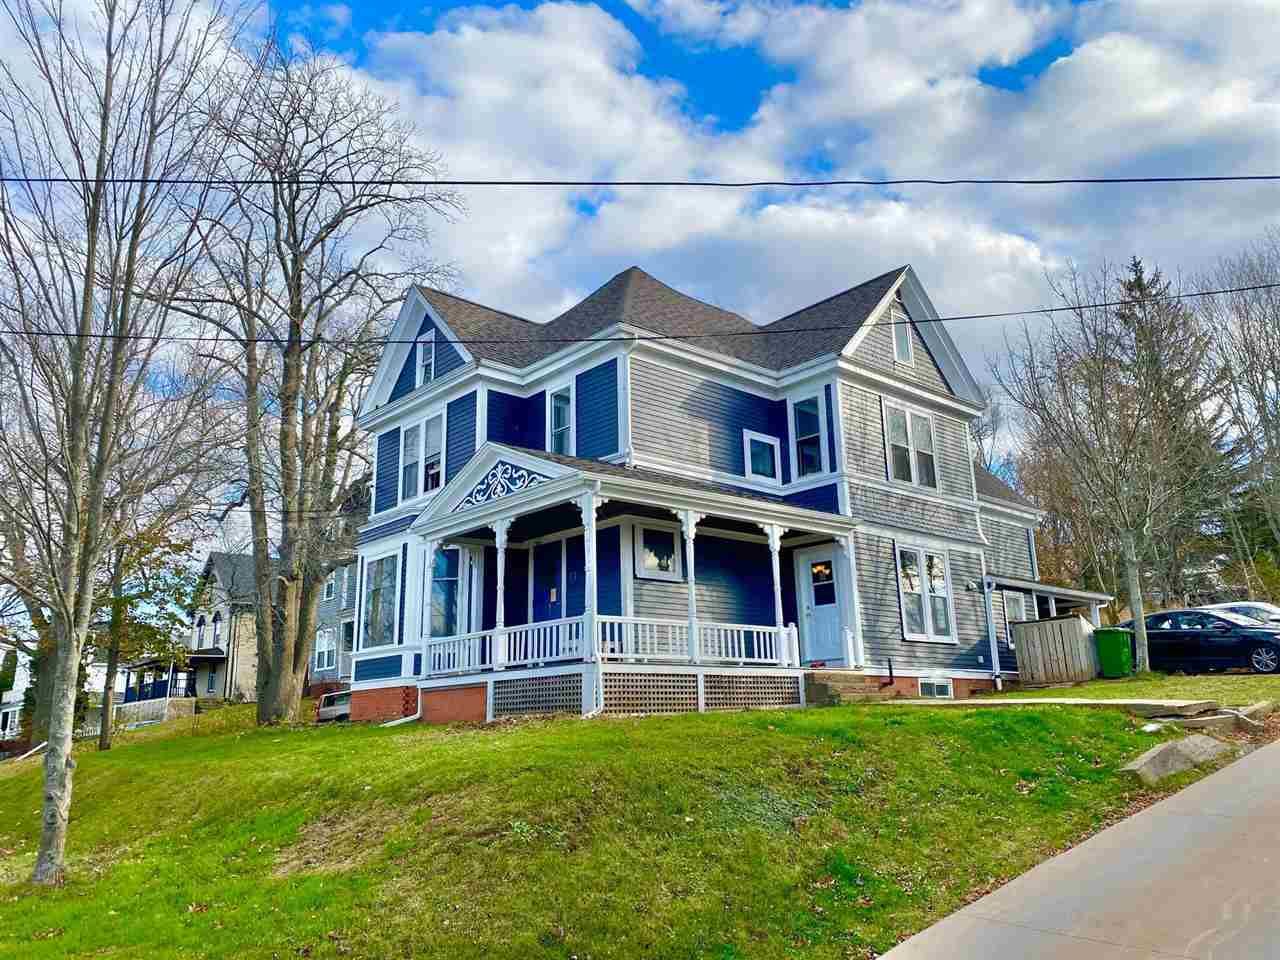 Main Photo: 27 Prospect Street in Wolfville: 404-Kings County Multi-Family for sale (Annapolis Valley)  : MLS®# 202024301